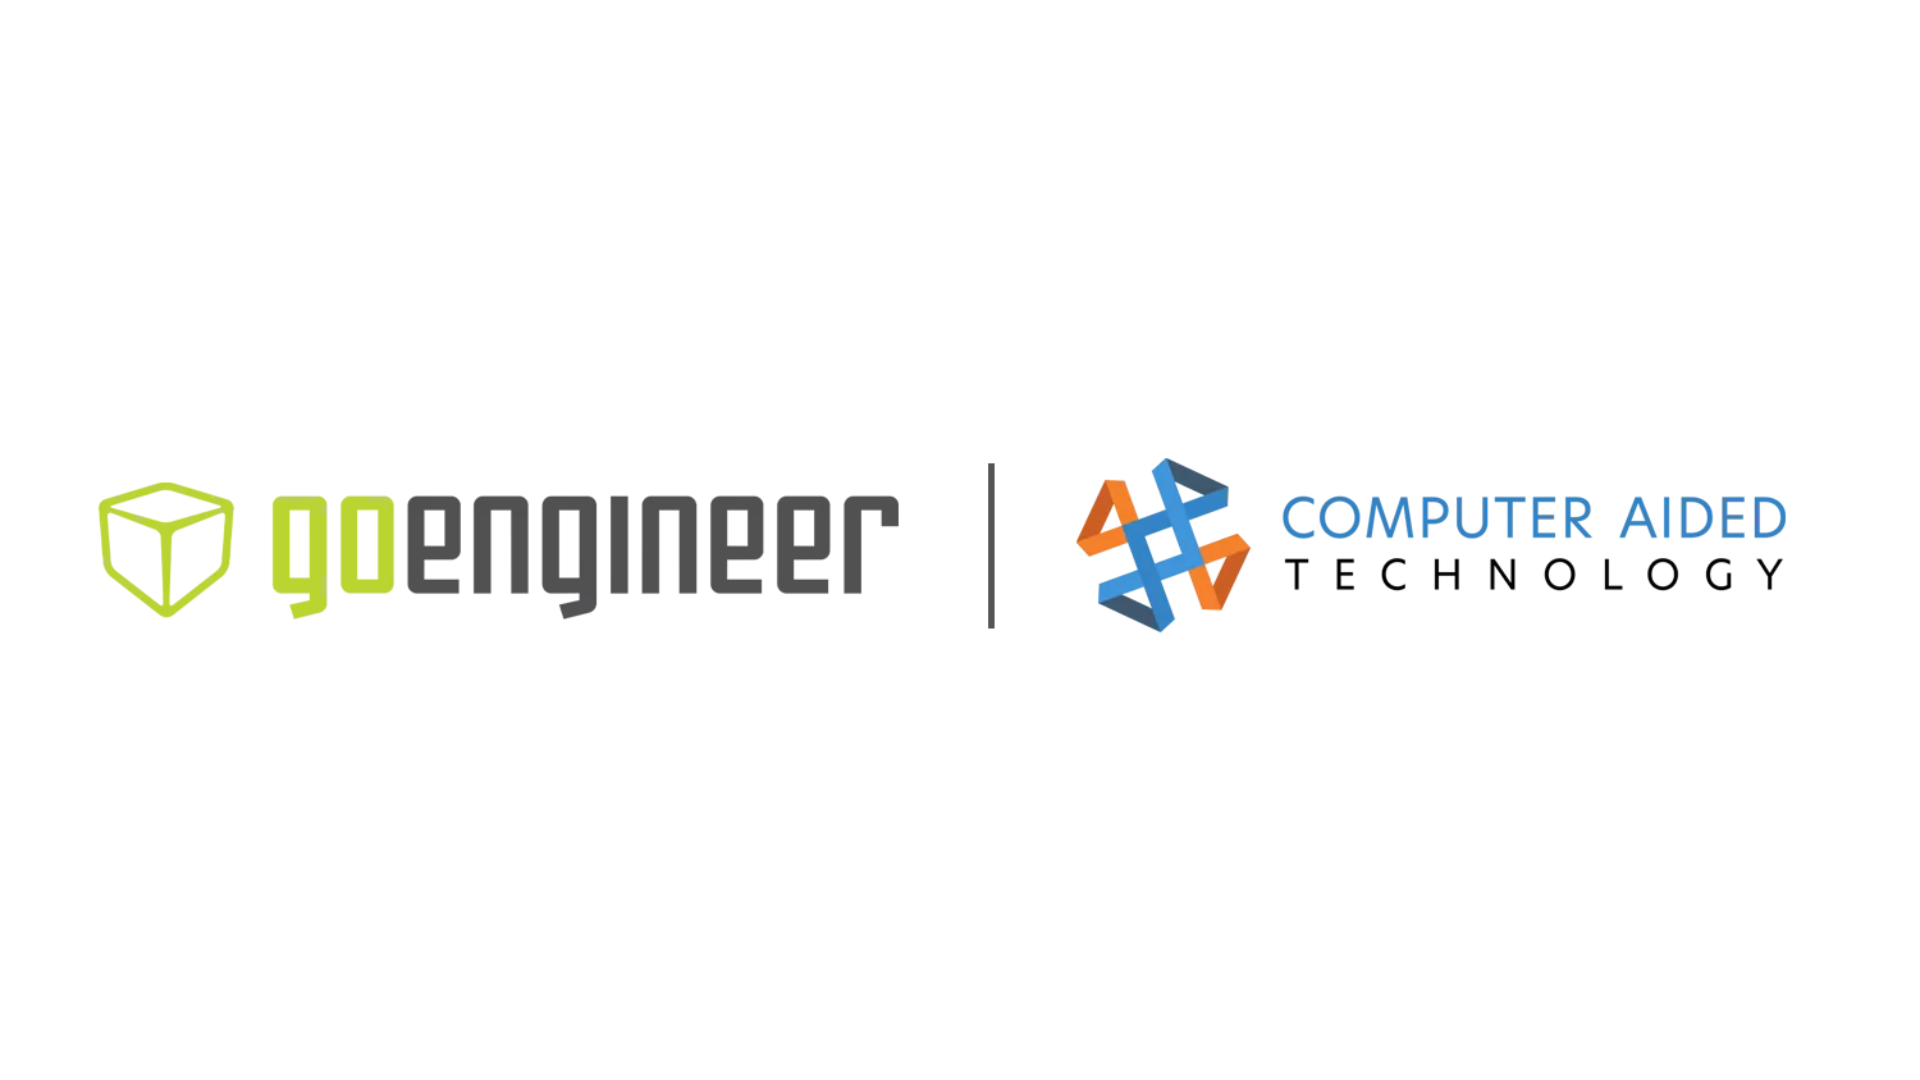 GoEngineer acquired Computer Aided Technology, Inc. (“CATI”), a product development solutions provider specializing in 3D printing software and hardware.